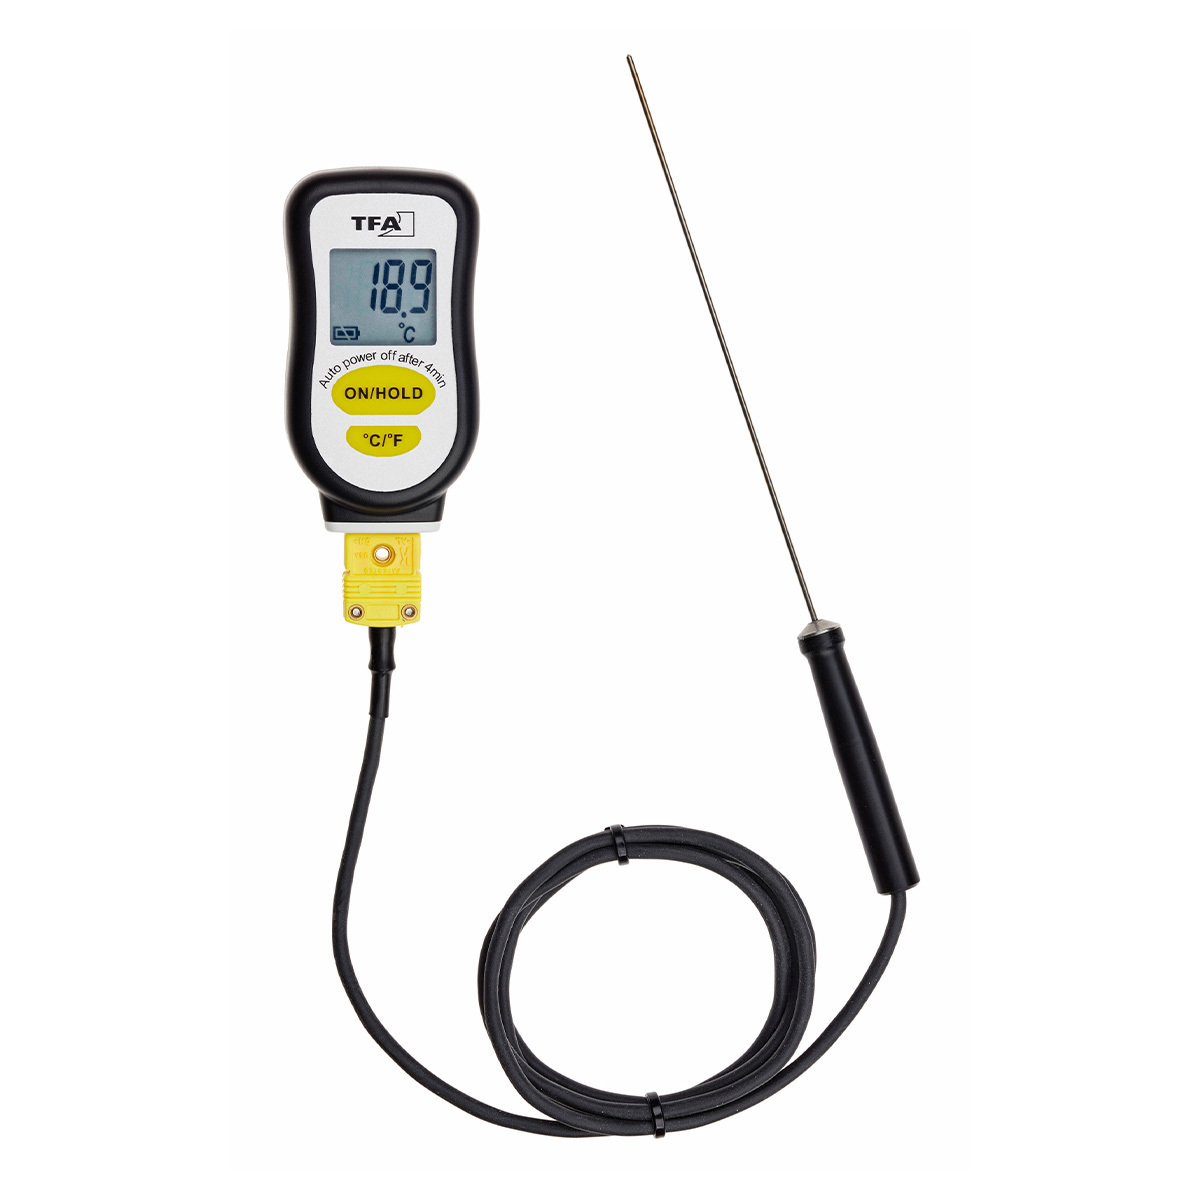 14-1552-01-digitales-sous-vide-thermometer-1200x1200px.jpg